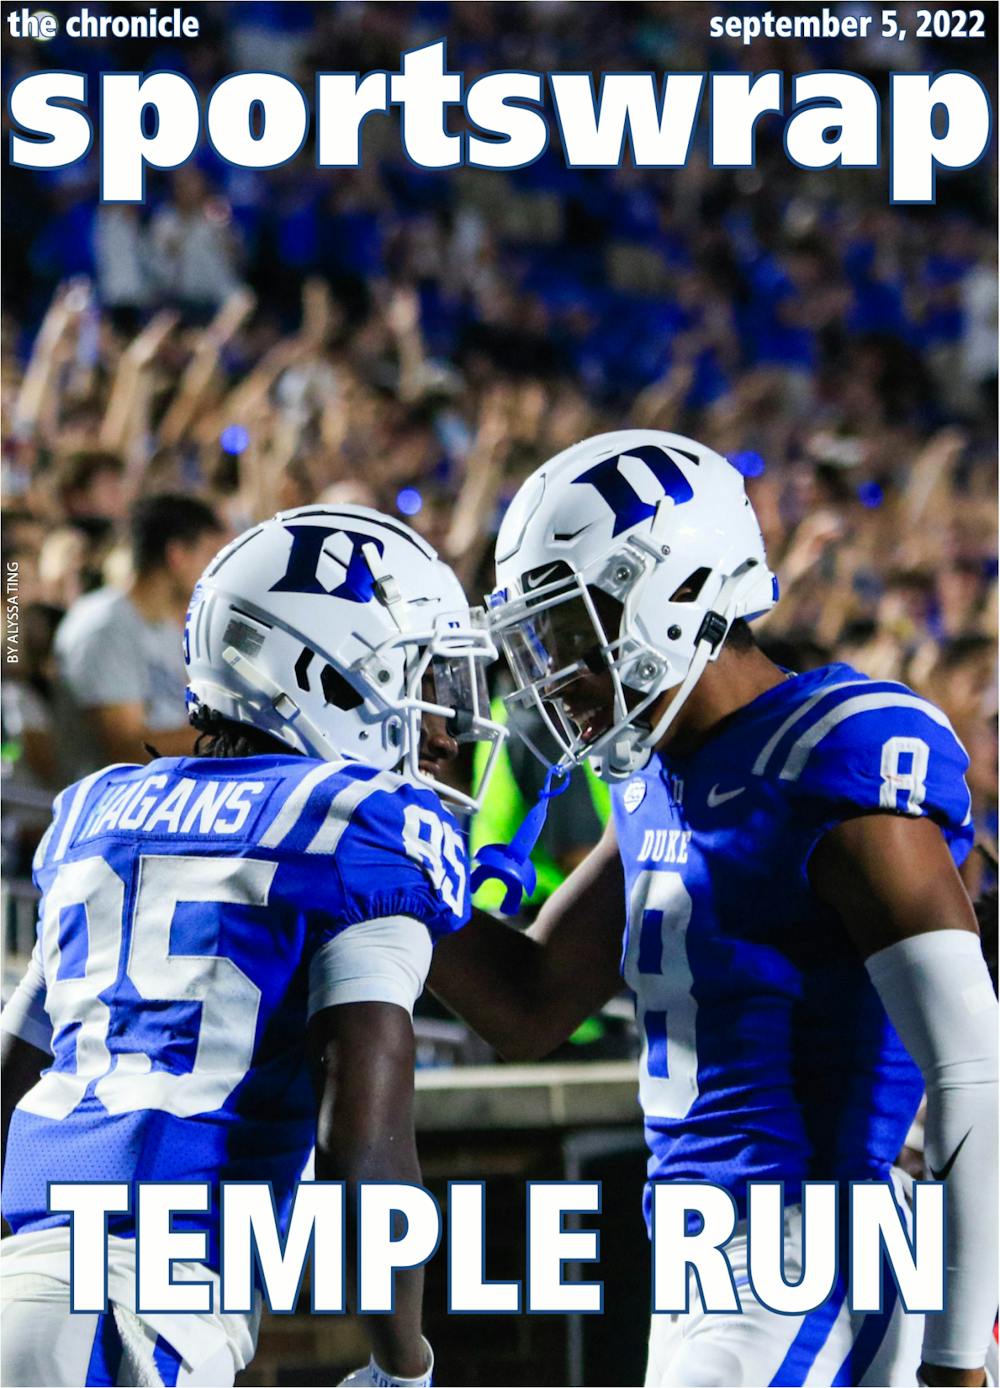 Duke football defeated Temple 30-0 in its home opener Friday.